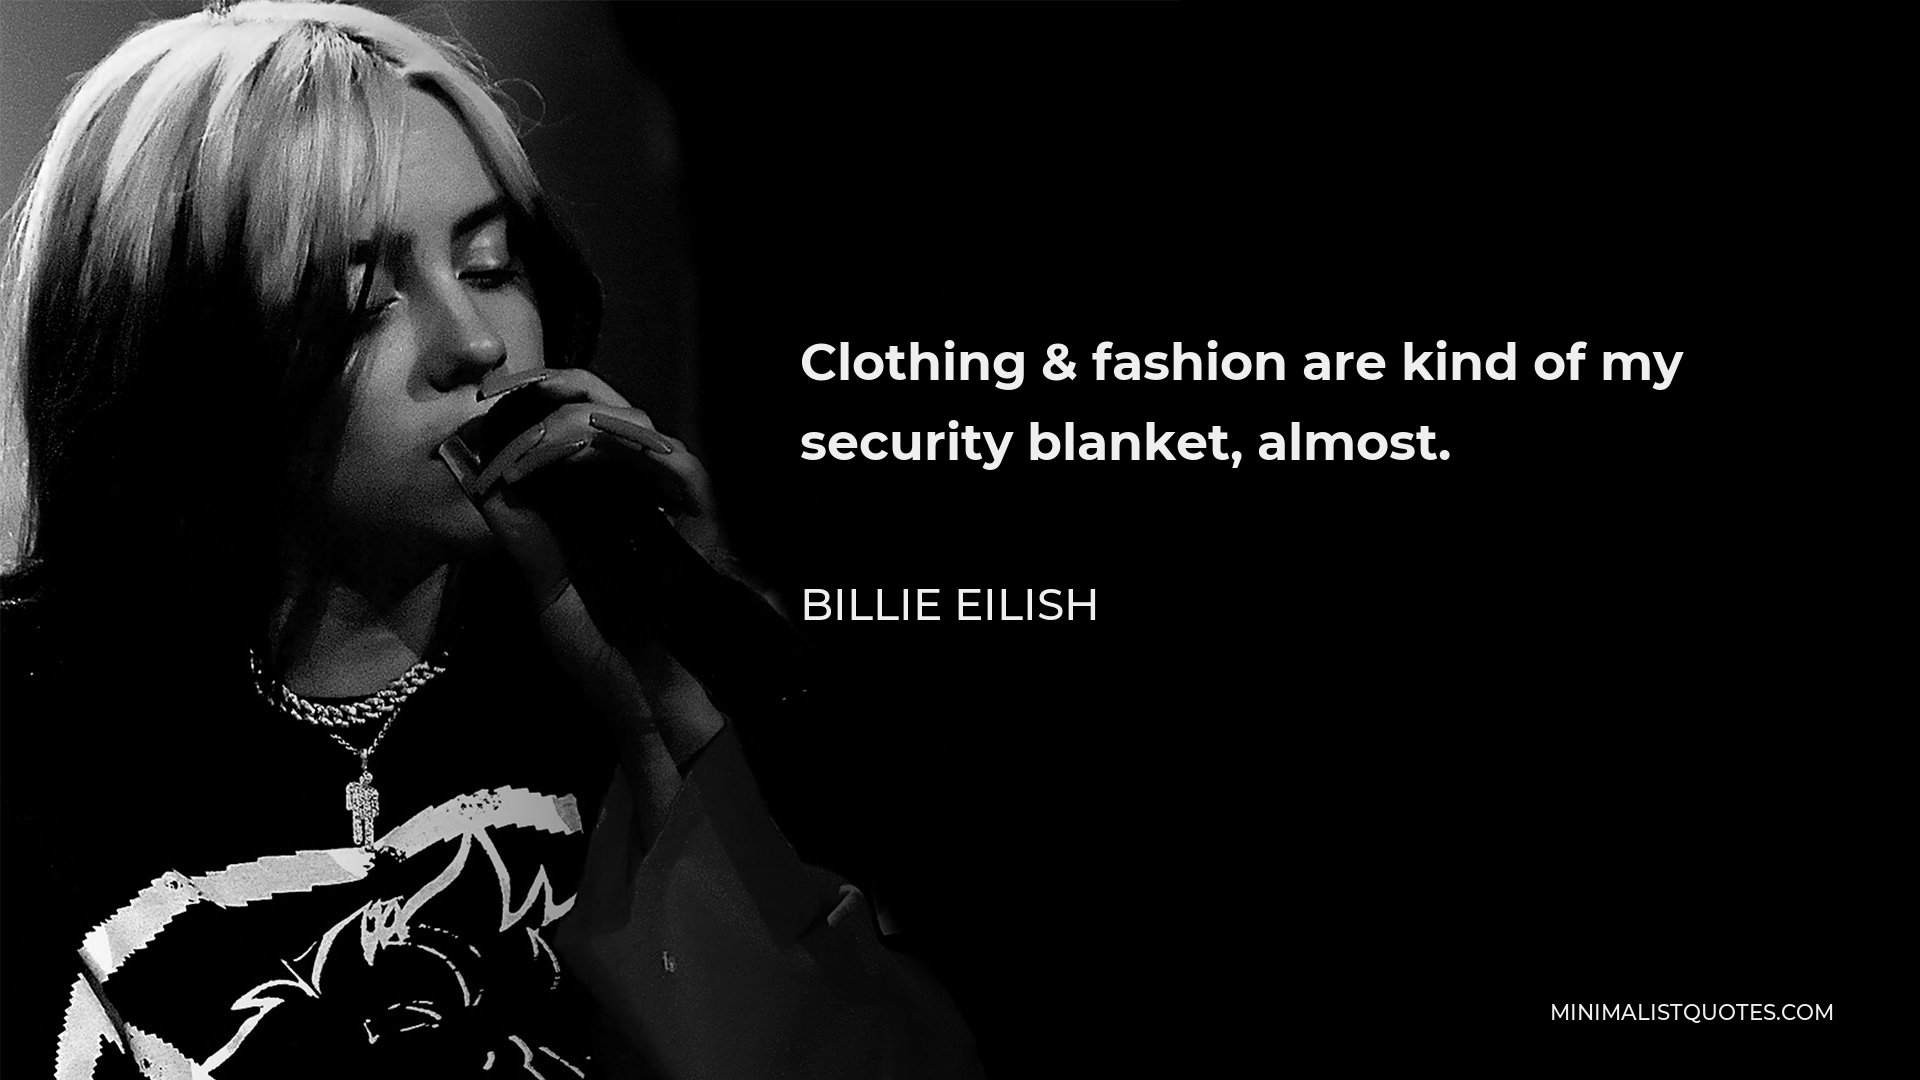 Billie Eilish Quote - Clothing & fashion are kind of my security blanket, almost.